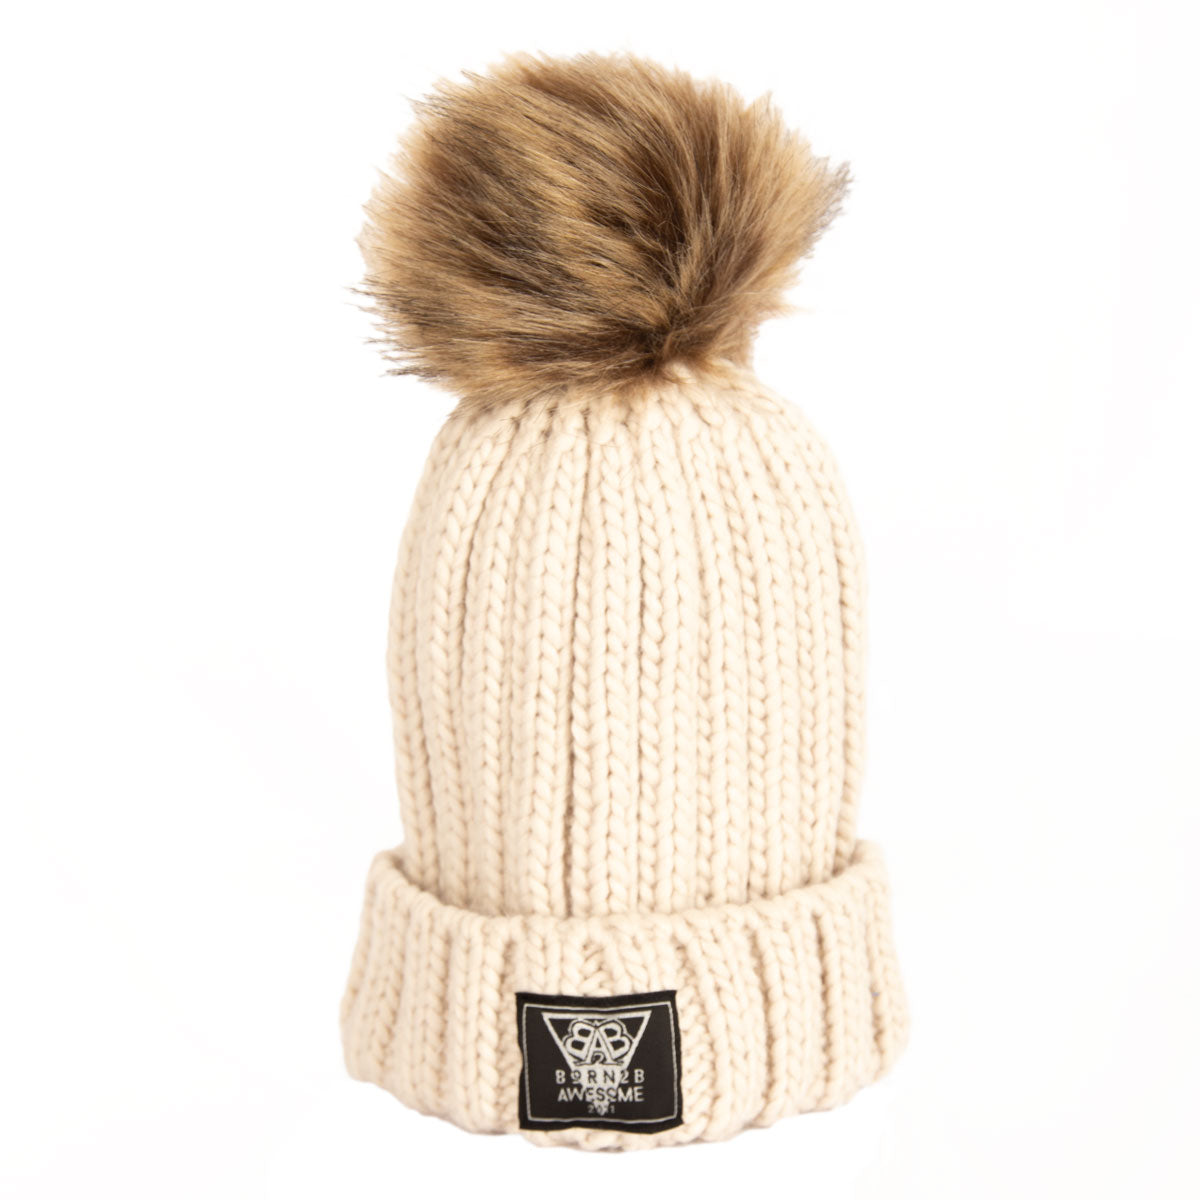 KIDS Knitted Bobble Beanie "Awesome Man" - B2BA Clothing